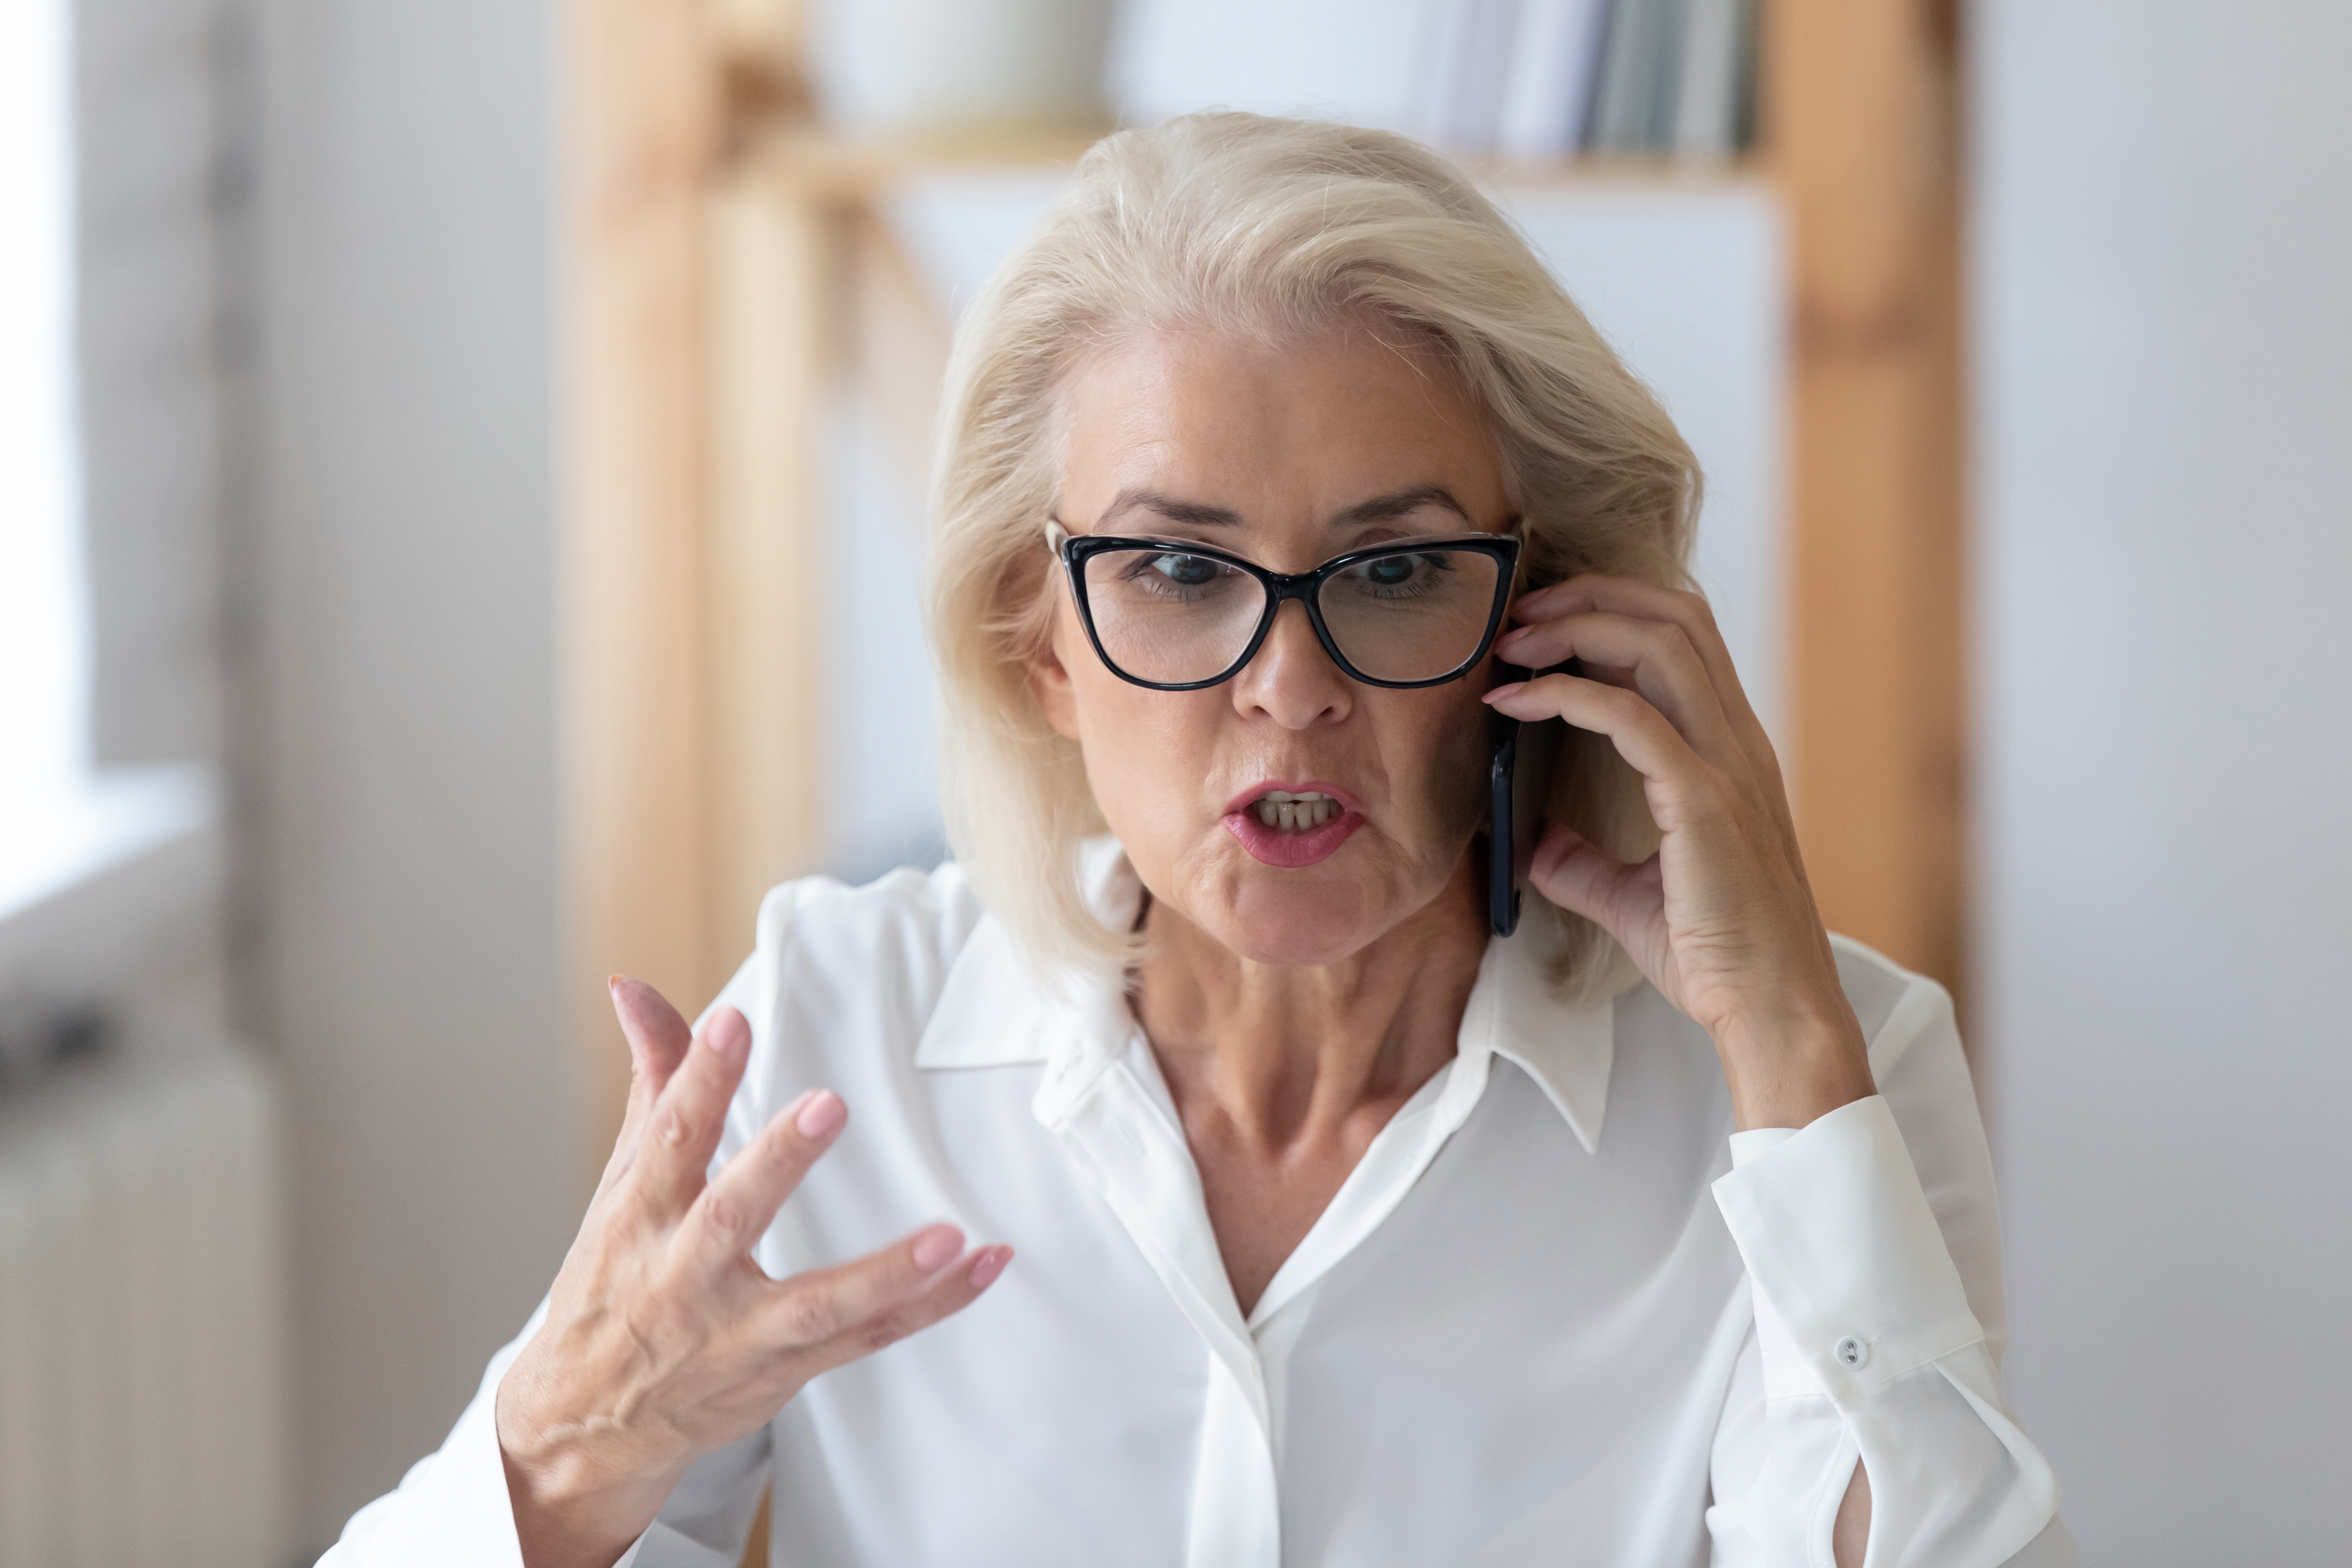 Upset older woman talking on the phone | Source: Shutterstock